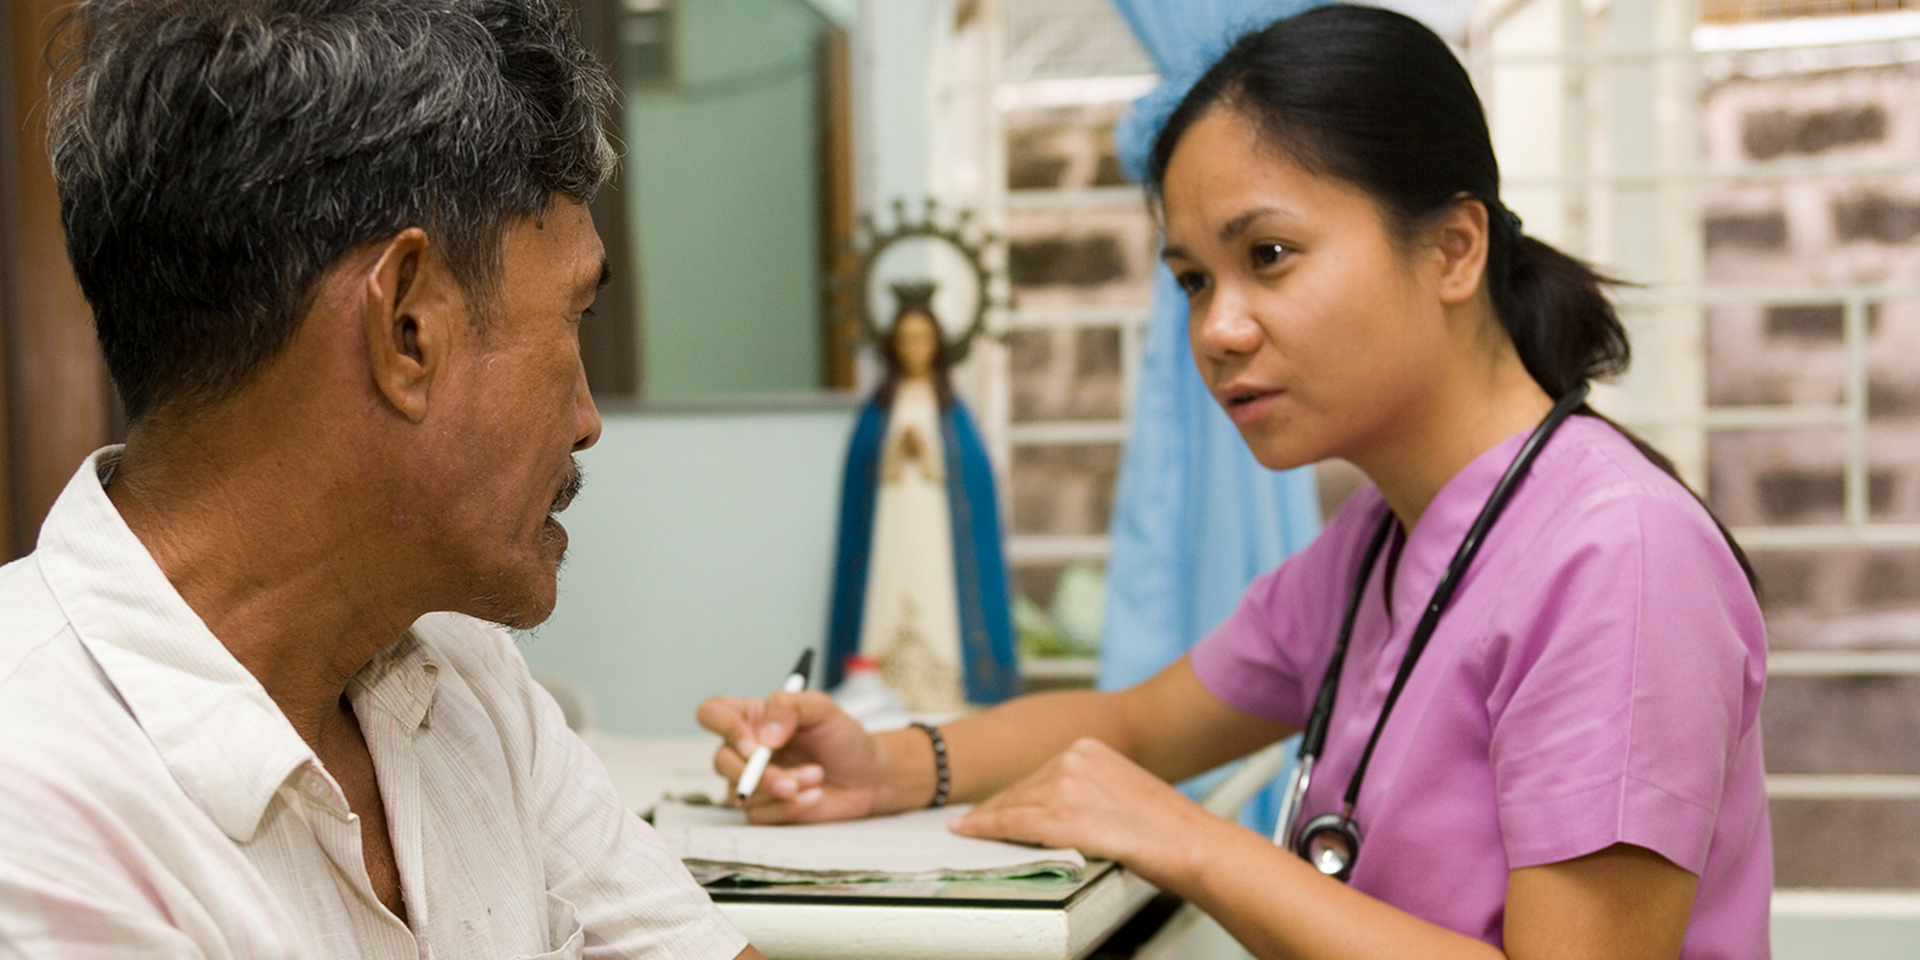 A healthcare worker interviewing a patient and taking notes.